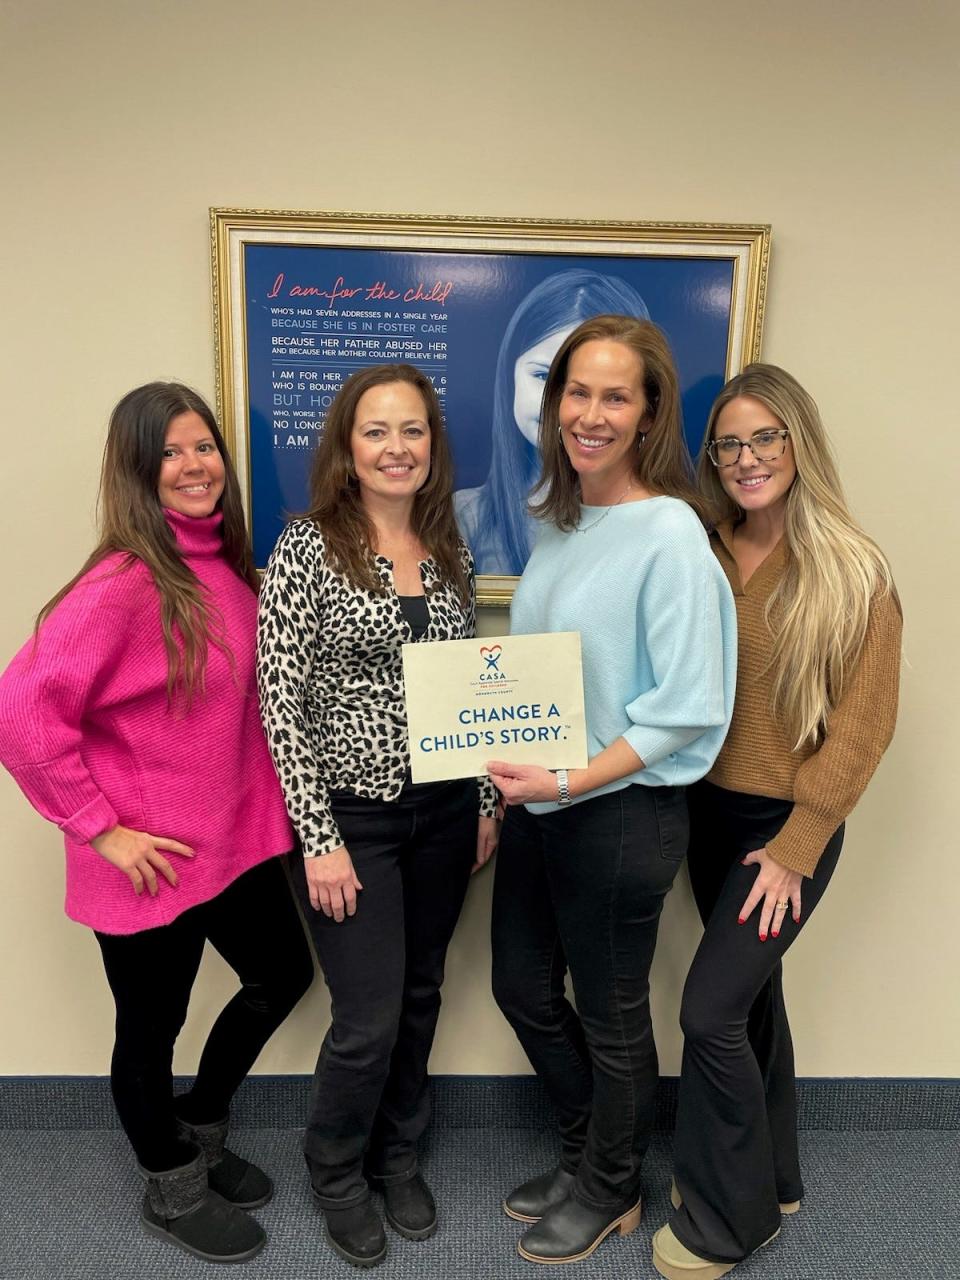 At CASA for Children of Monmouth County headquarters in Ocean Township: Volunteer advocate Alex Skove (second from right) with staff members Monica Davidson (far left), Renee Gregory (second from left) and Jill Clancy (far right).